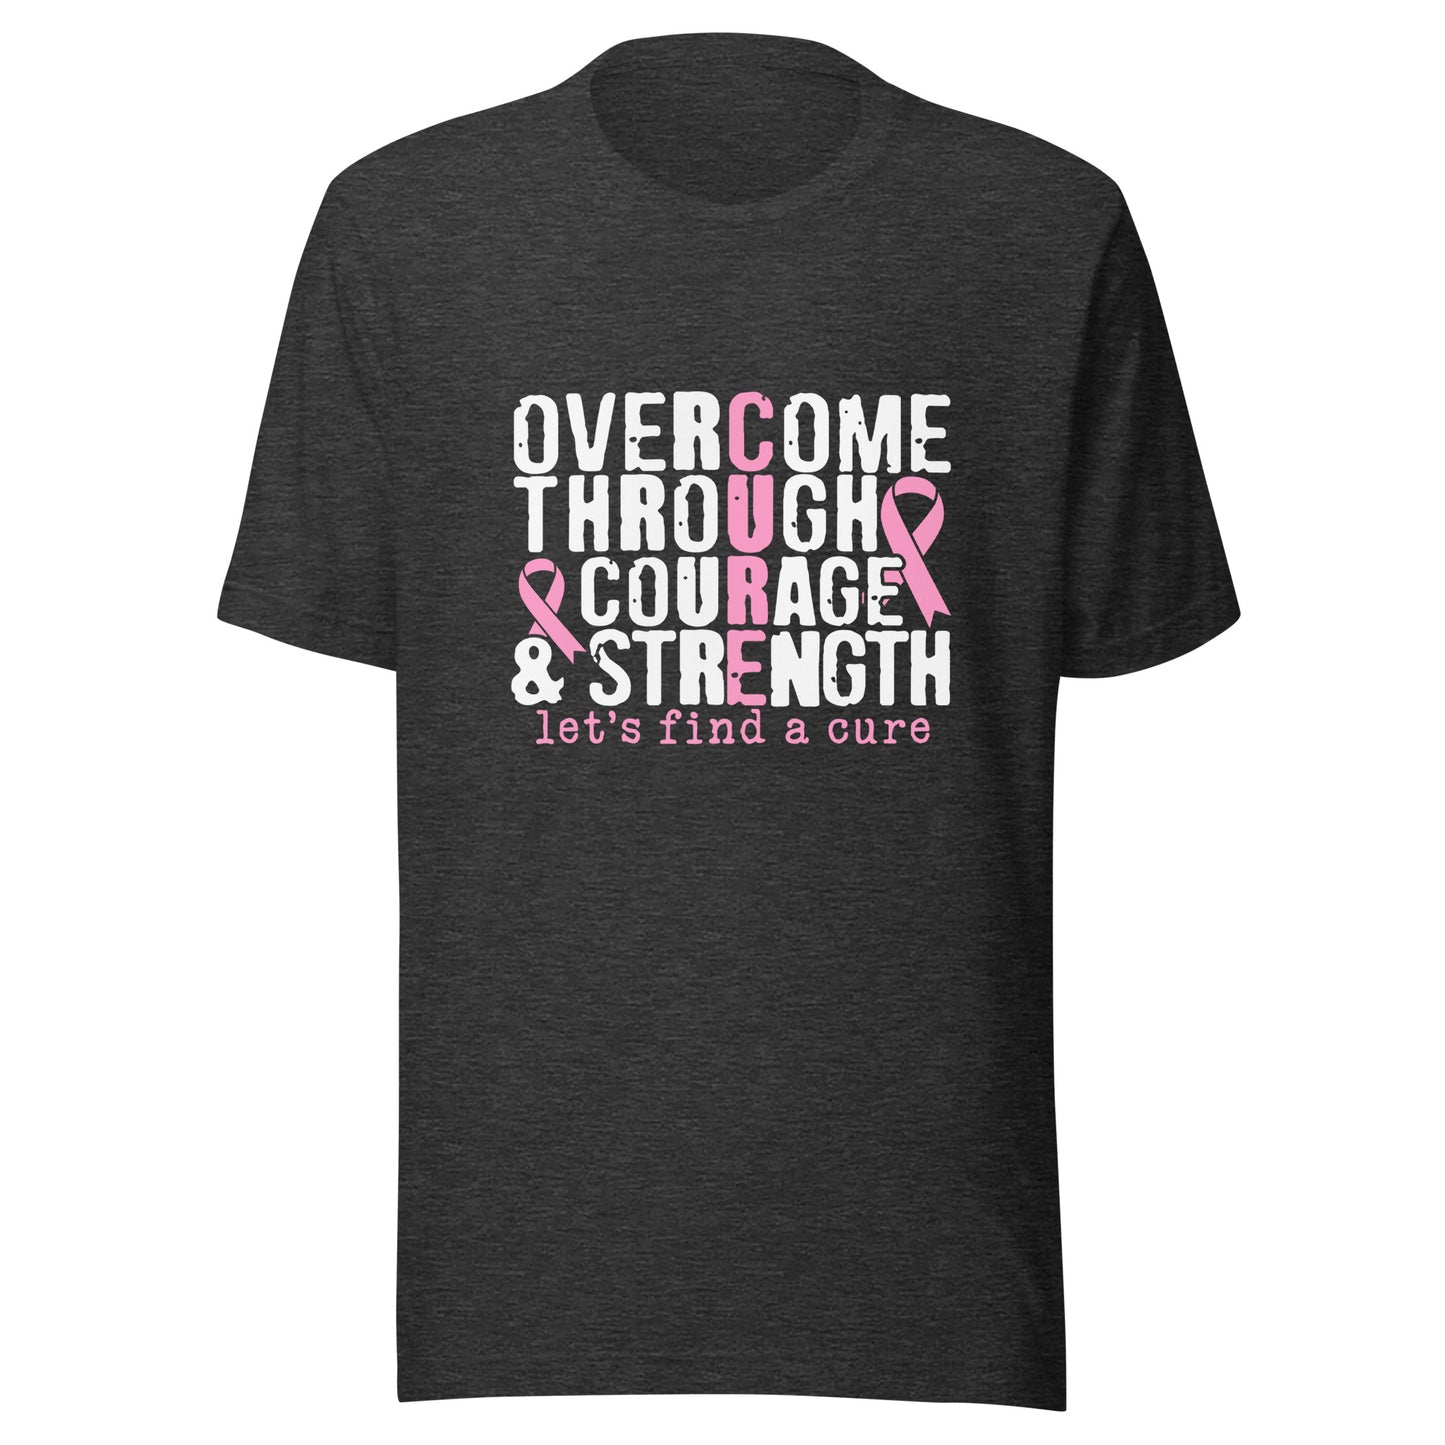 Overcome Through Courage Strength - Breast Cancer Awareness Pink Cancer Ribbon Support Unisex T-shirt